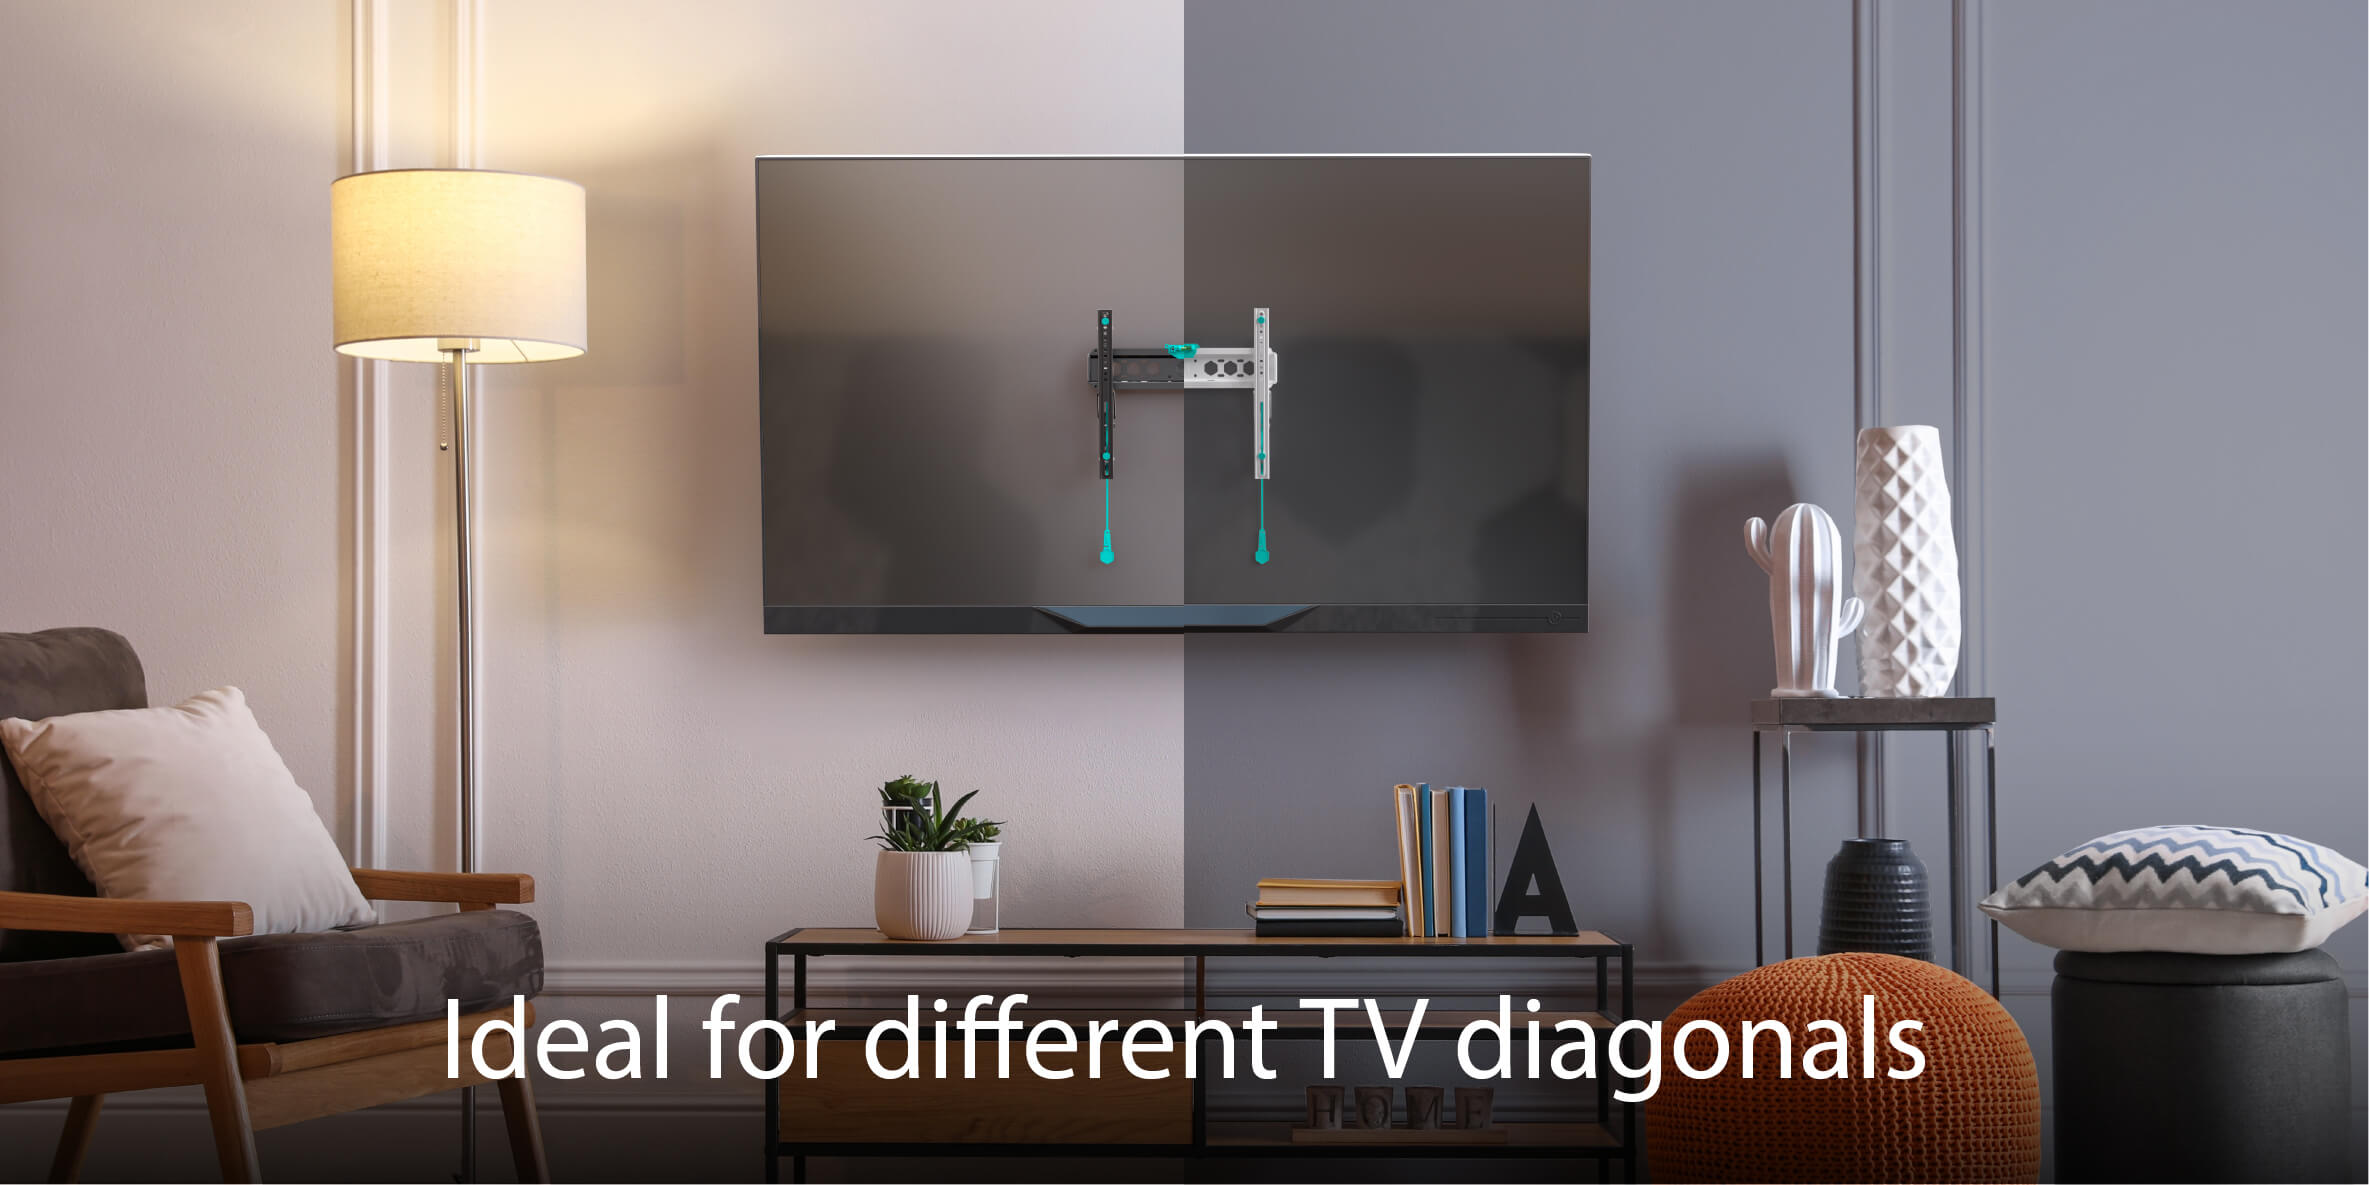 Ideal for different TV diagonals